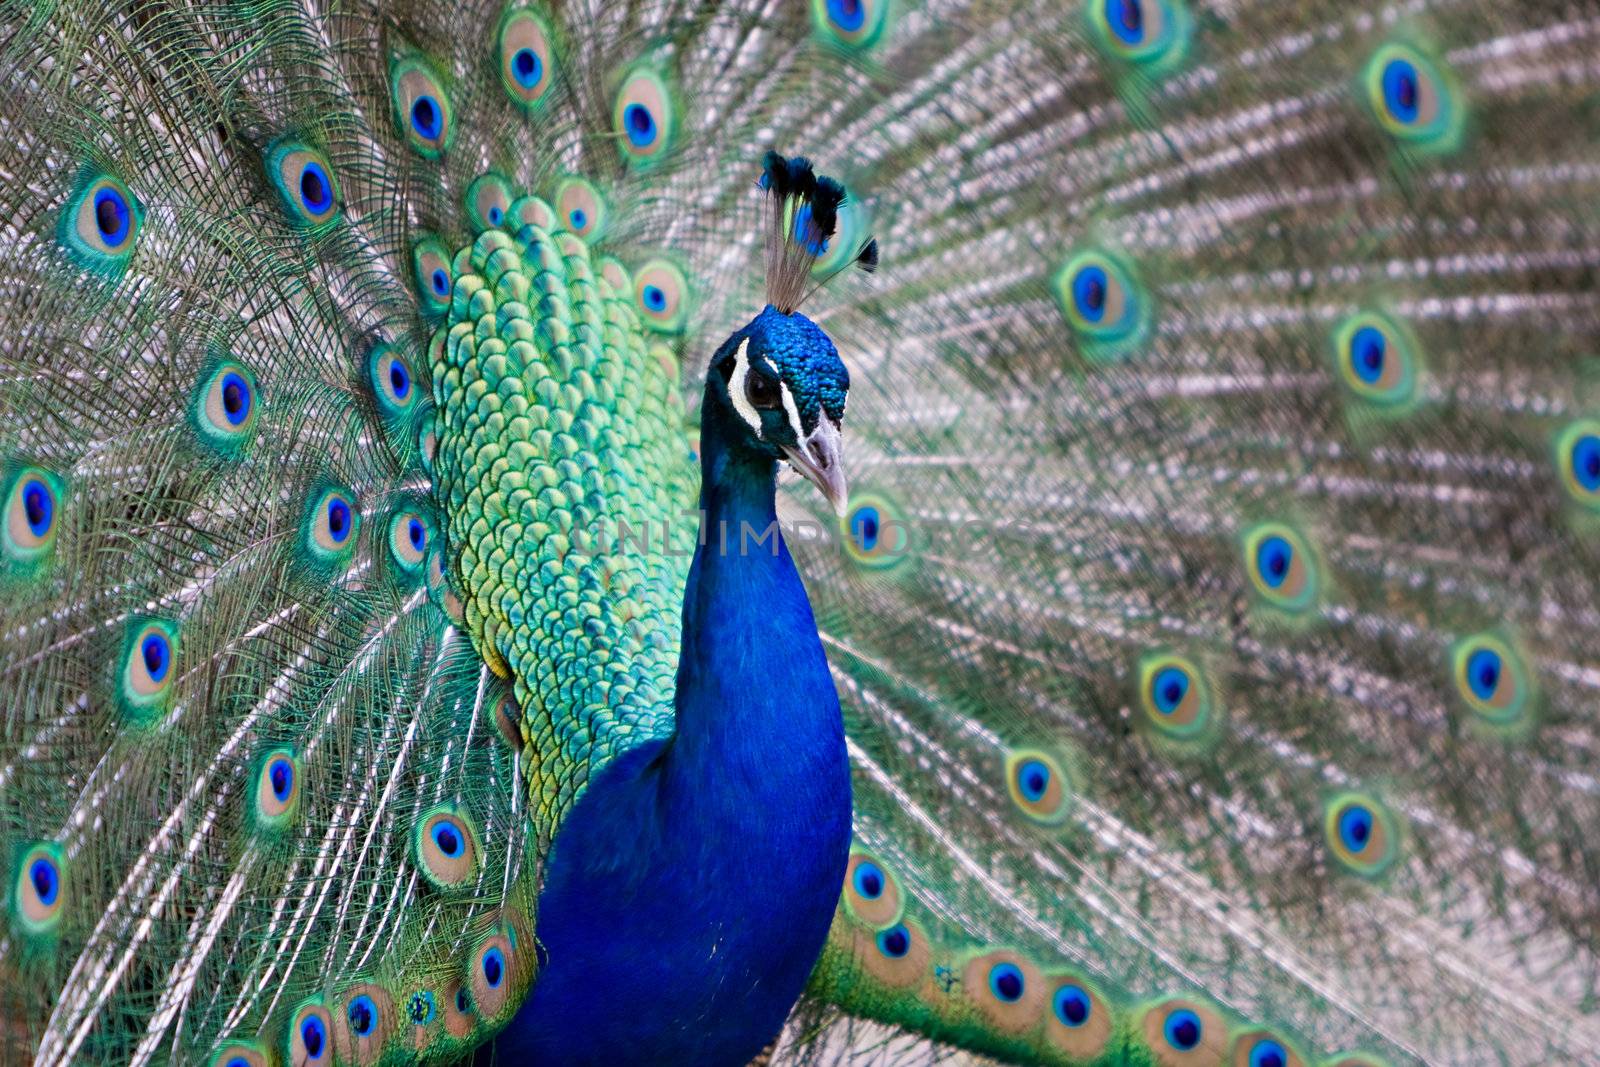 Beautiful male peacock with colorful tail fully opened